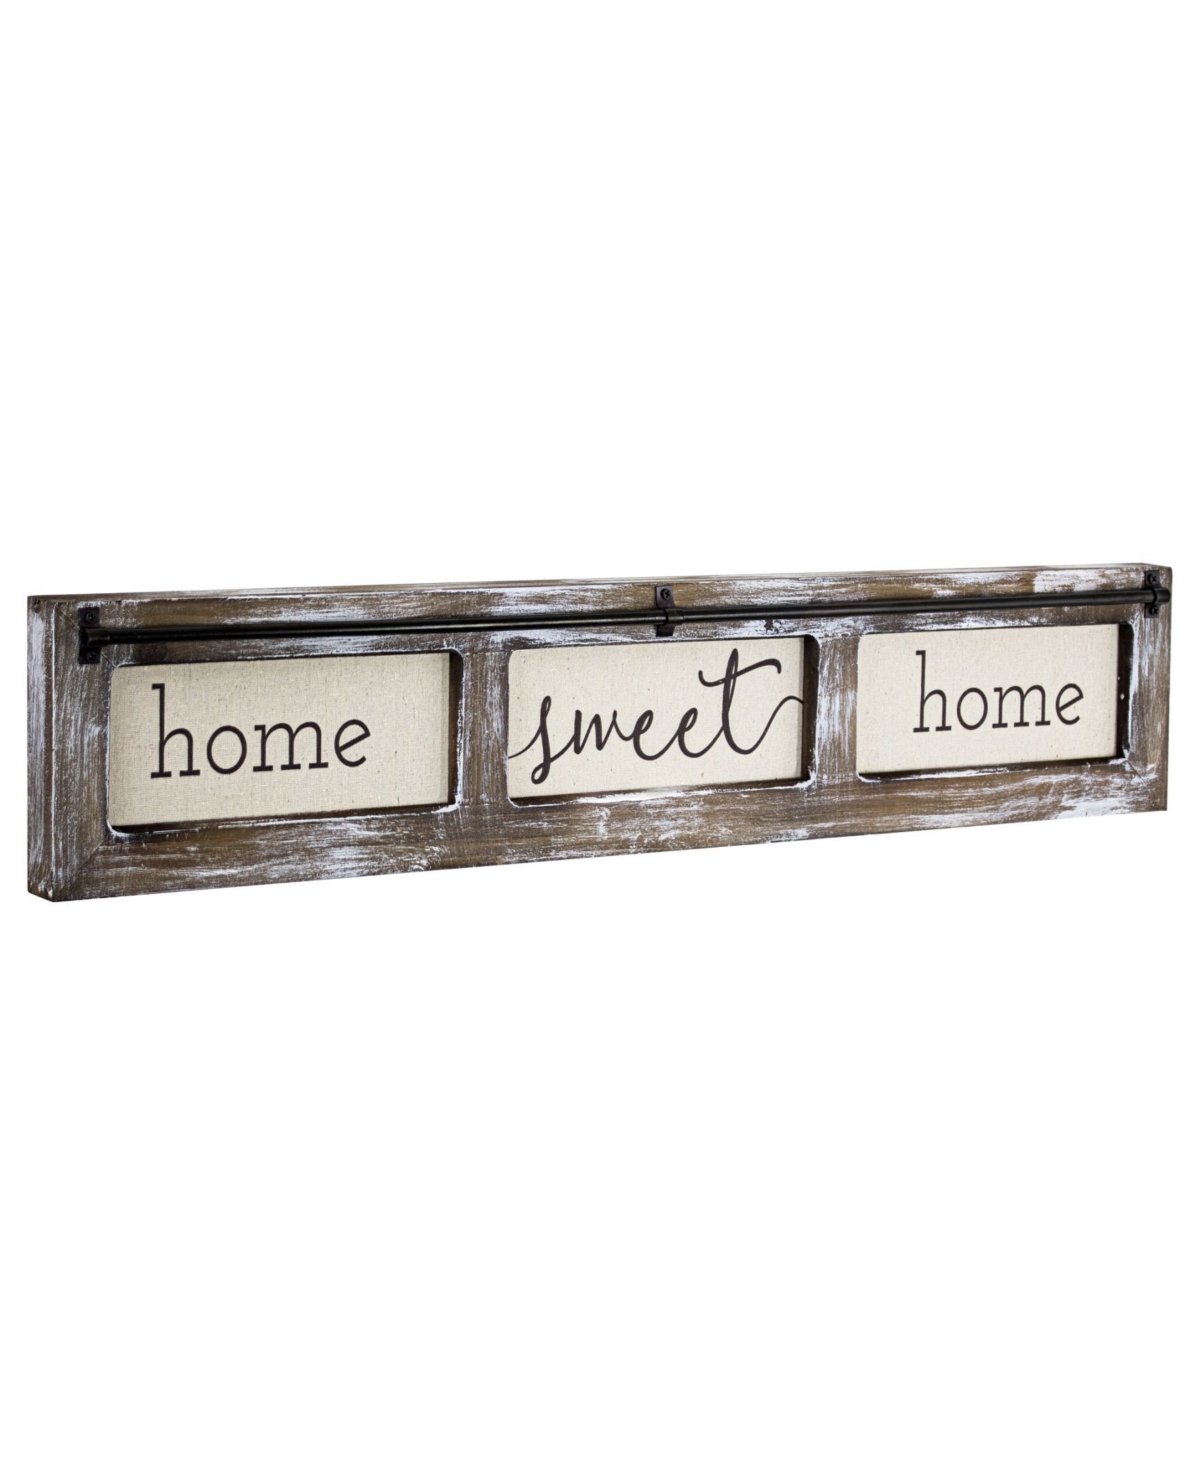 Crystal Art Gallery American Art Decor Home Sweet Home Rustic Wood Canvas Sign In Multi